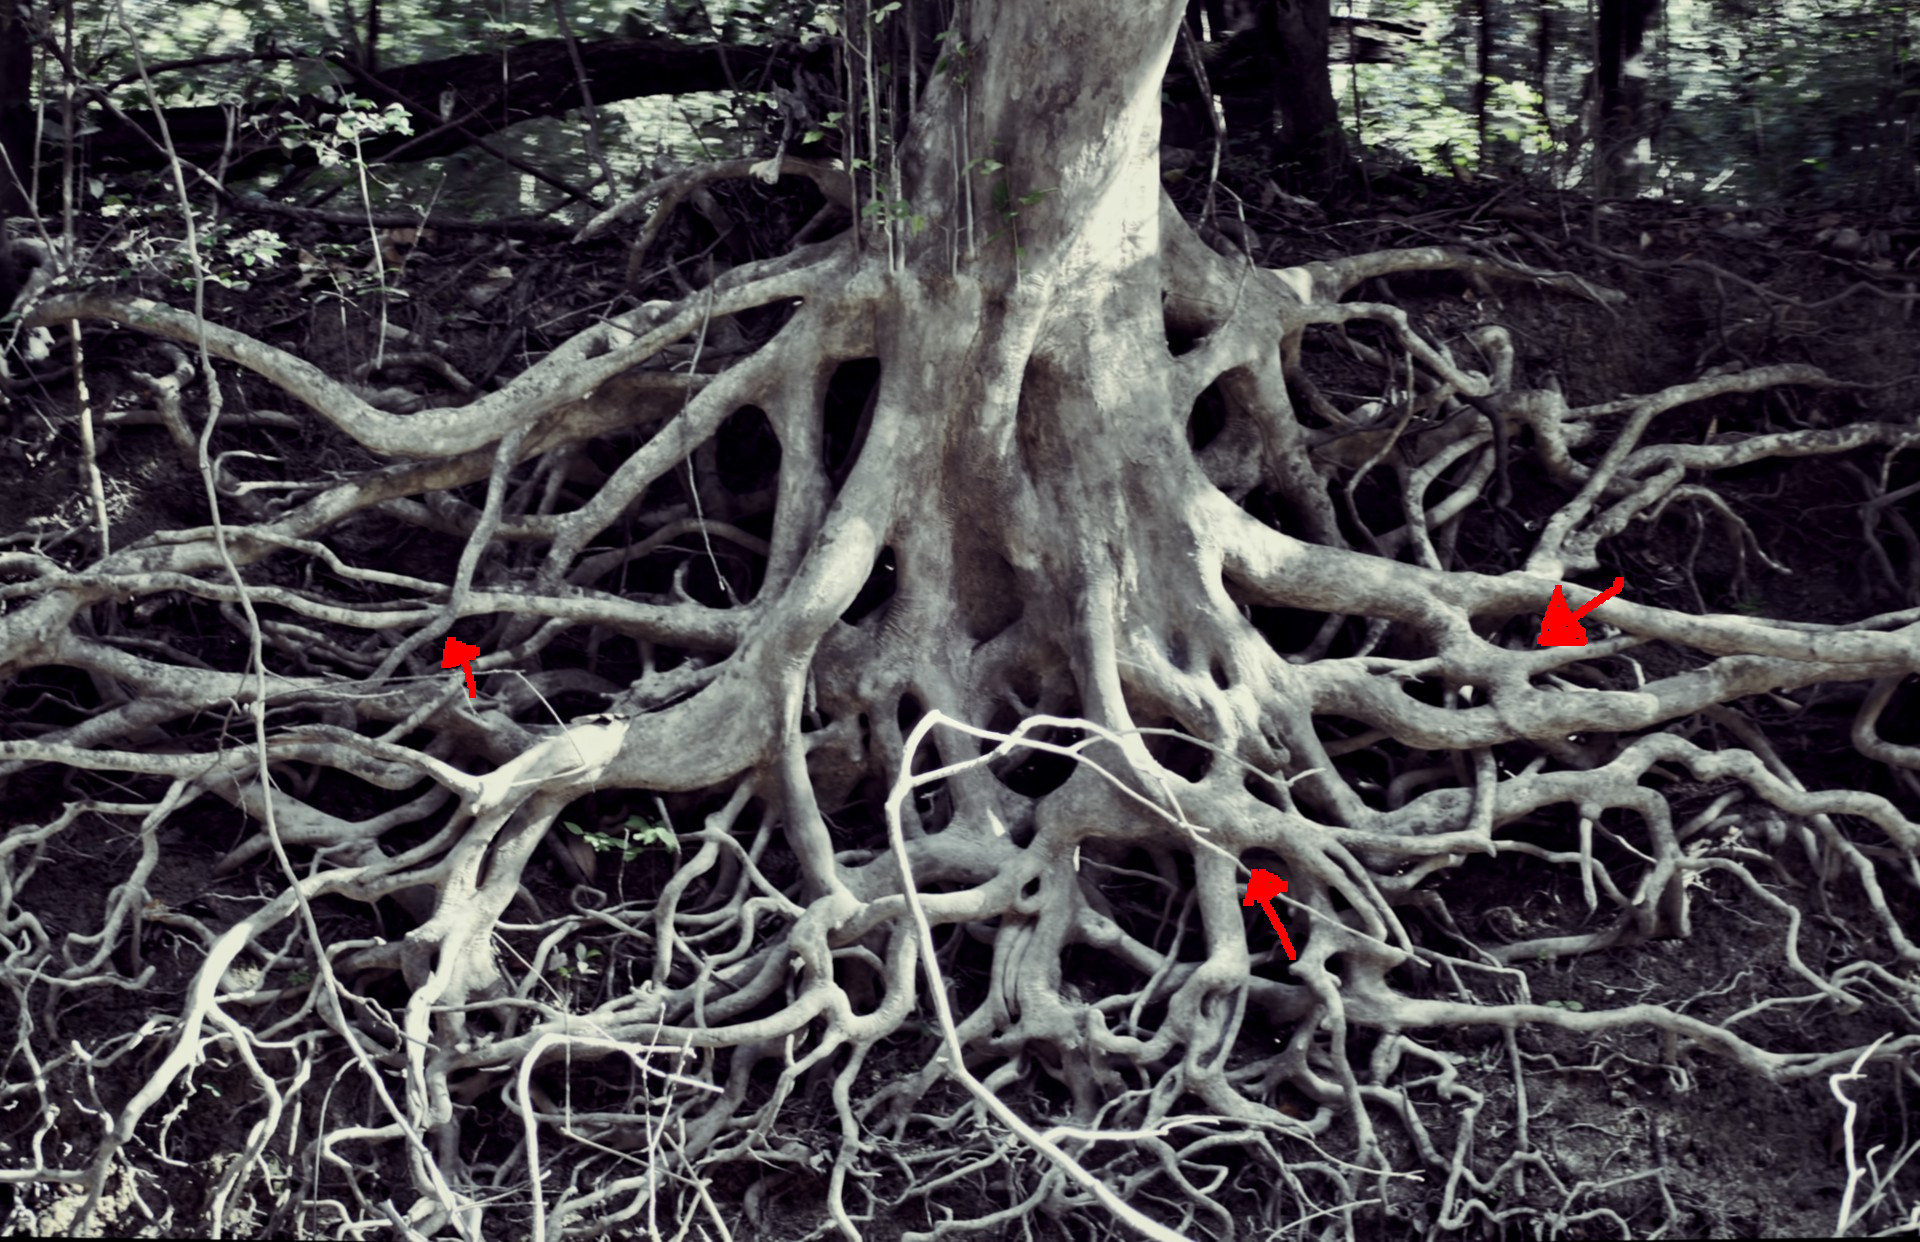 This tree’s roots have grown together into a toroidal graph-like structure